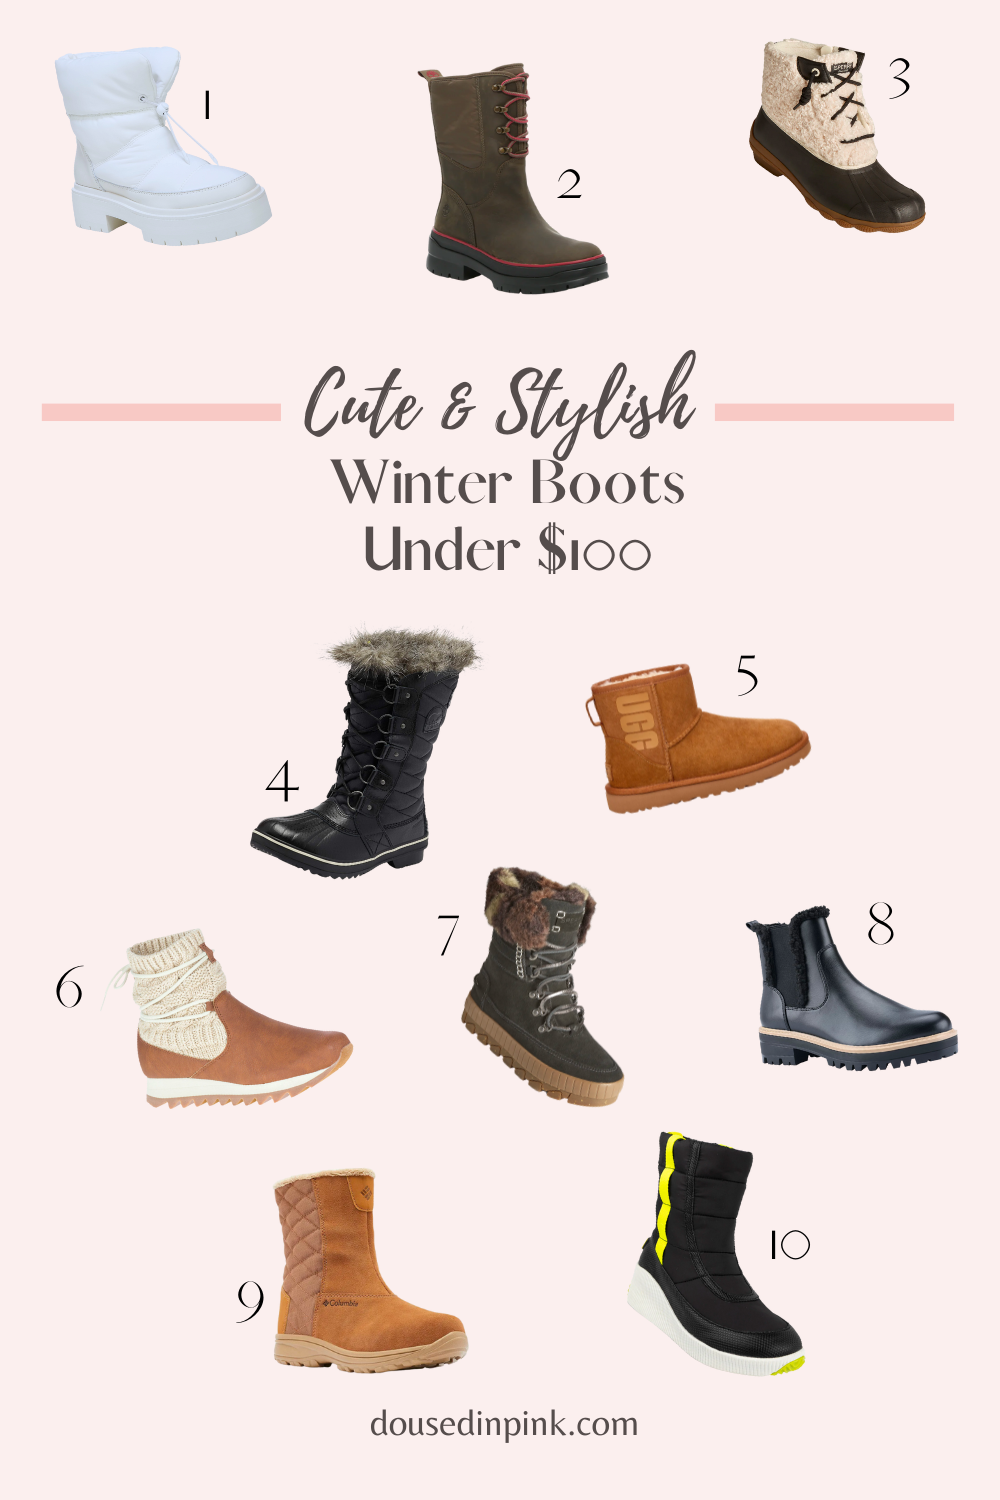 Sorel Boots / Casual Winter Style